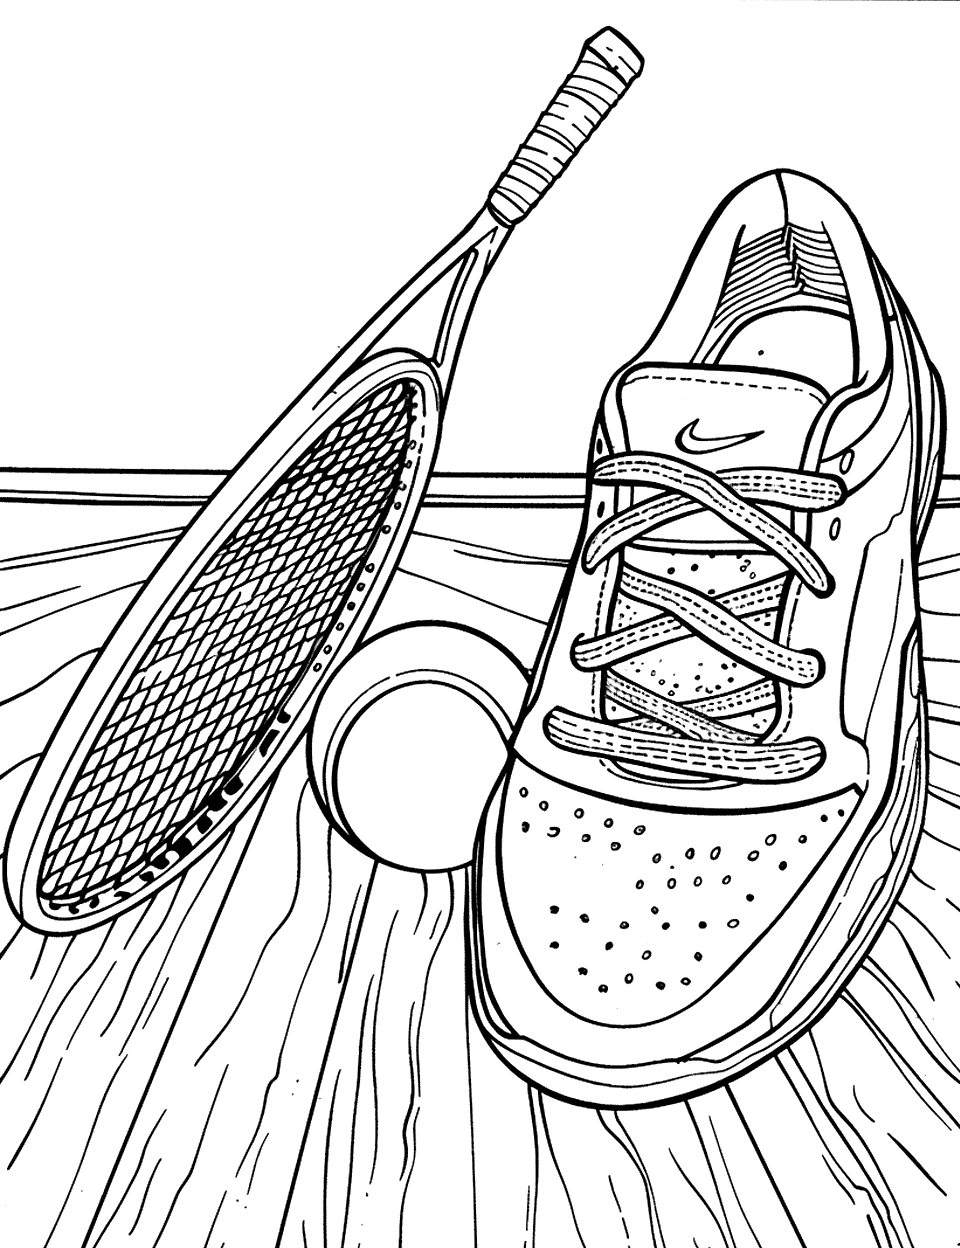 Squash Shoes in Court Shoe Coloring Page - Squash shoes with a squash racket and ball on a court floor.